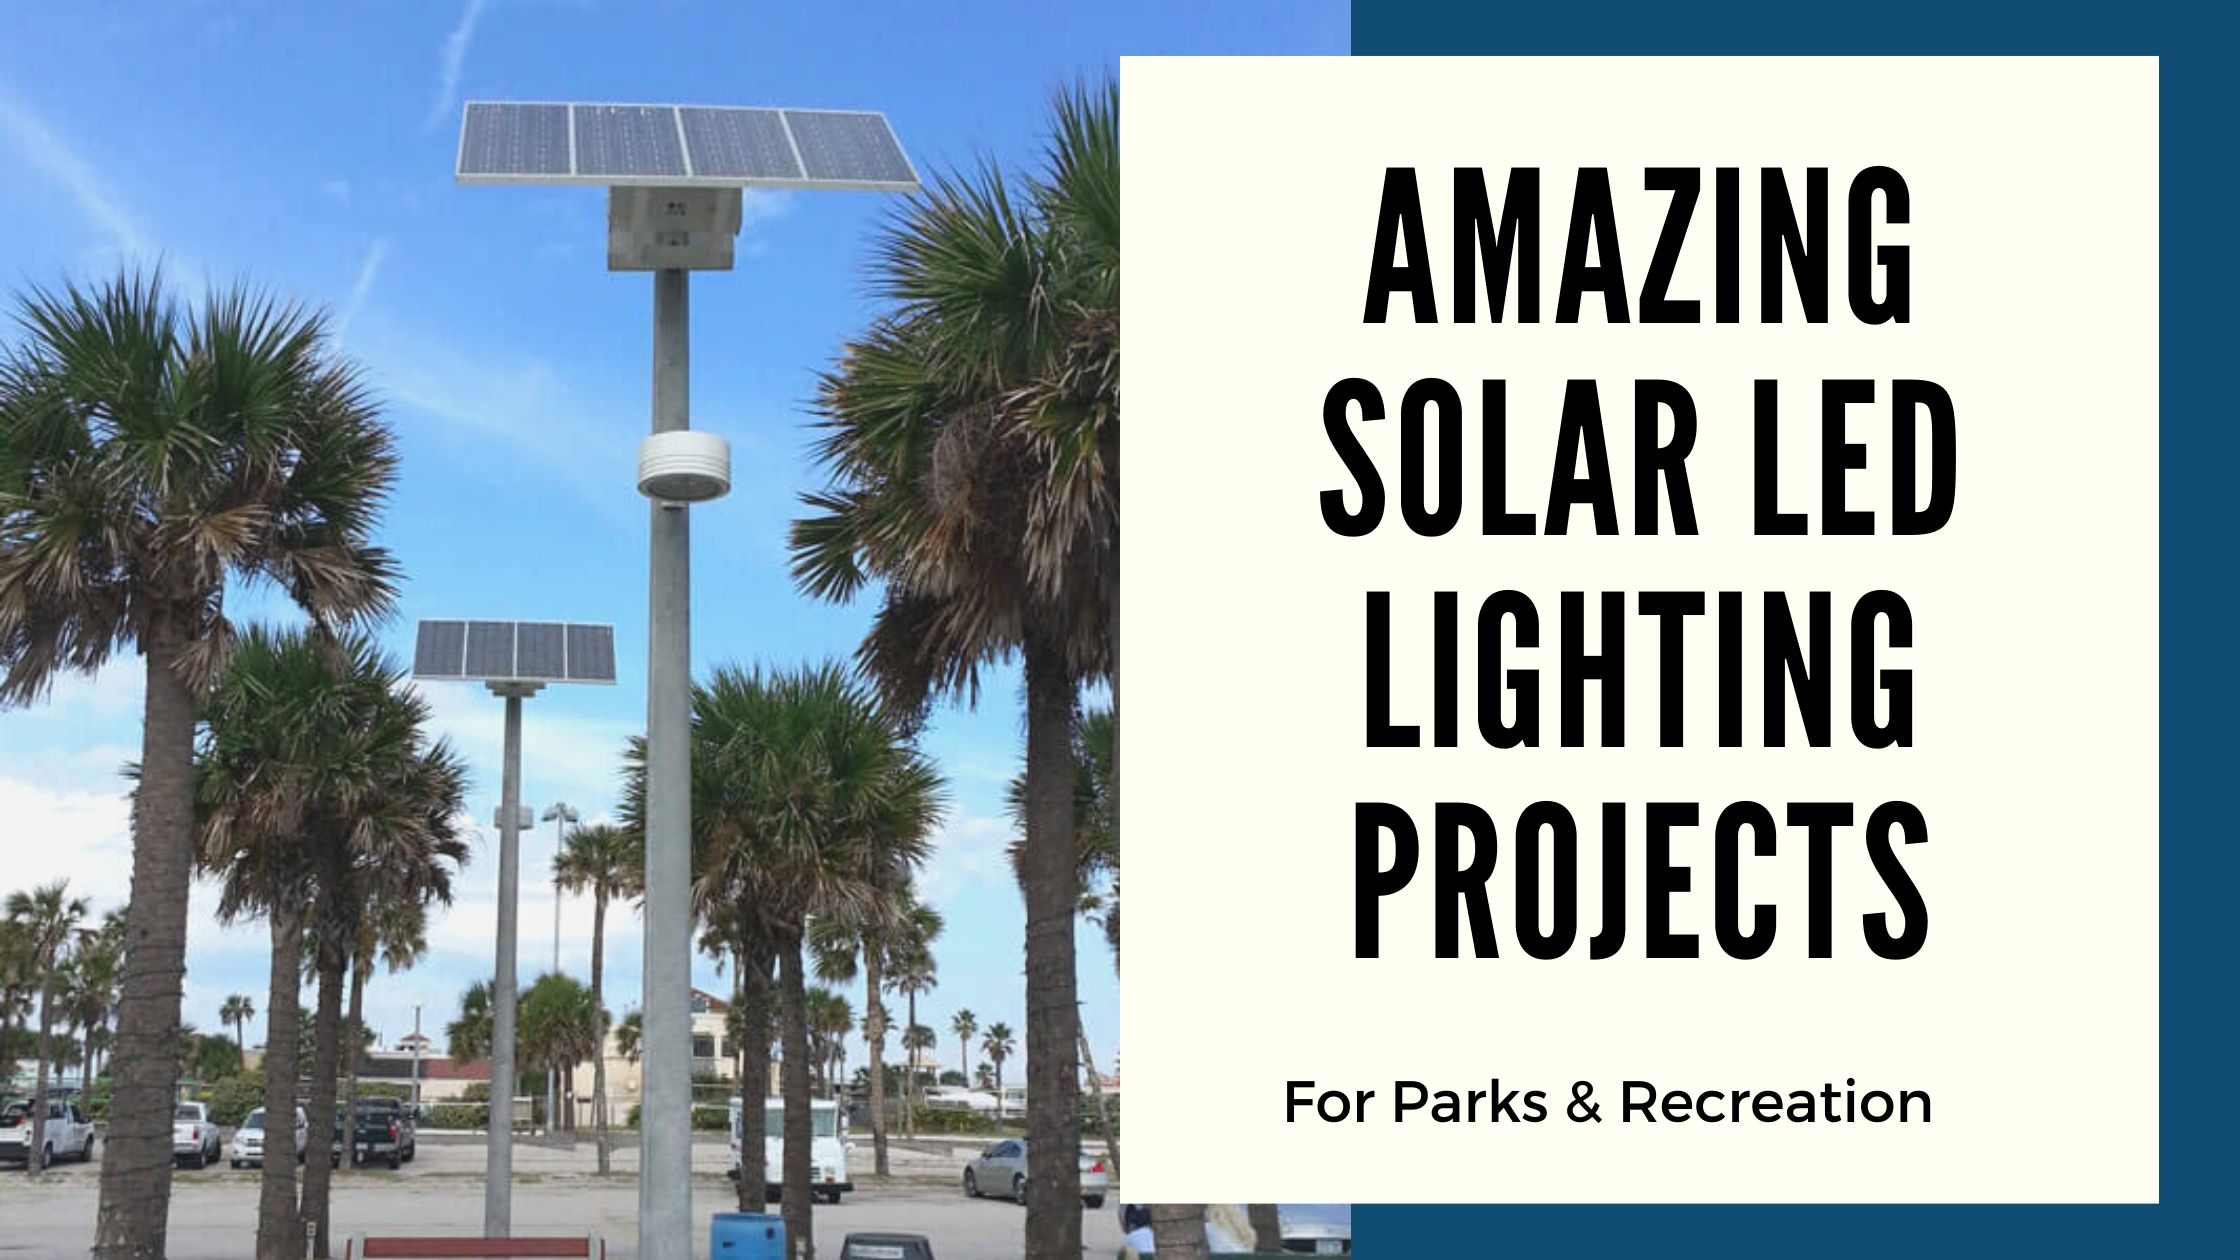 Solar LED Lighting Projects Parks & Recreation